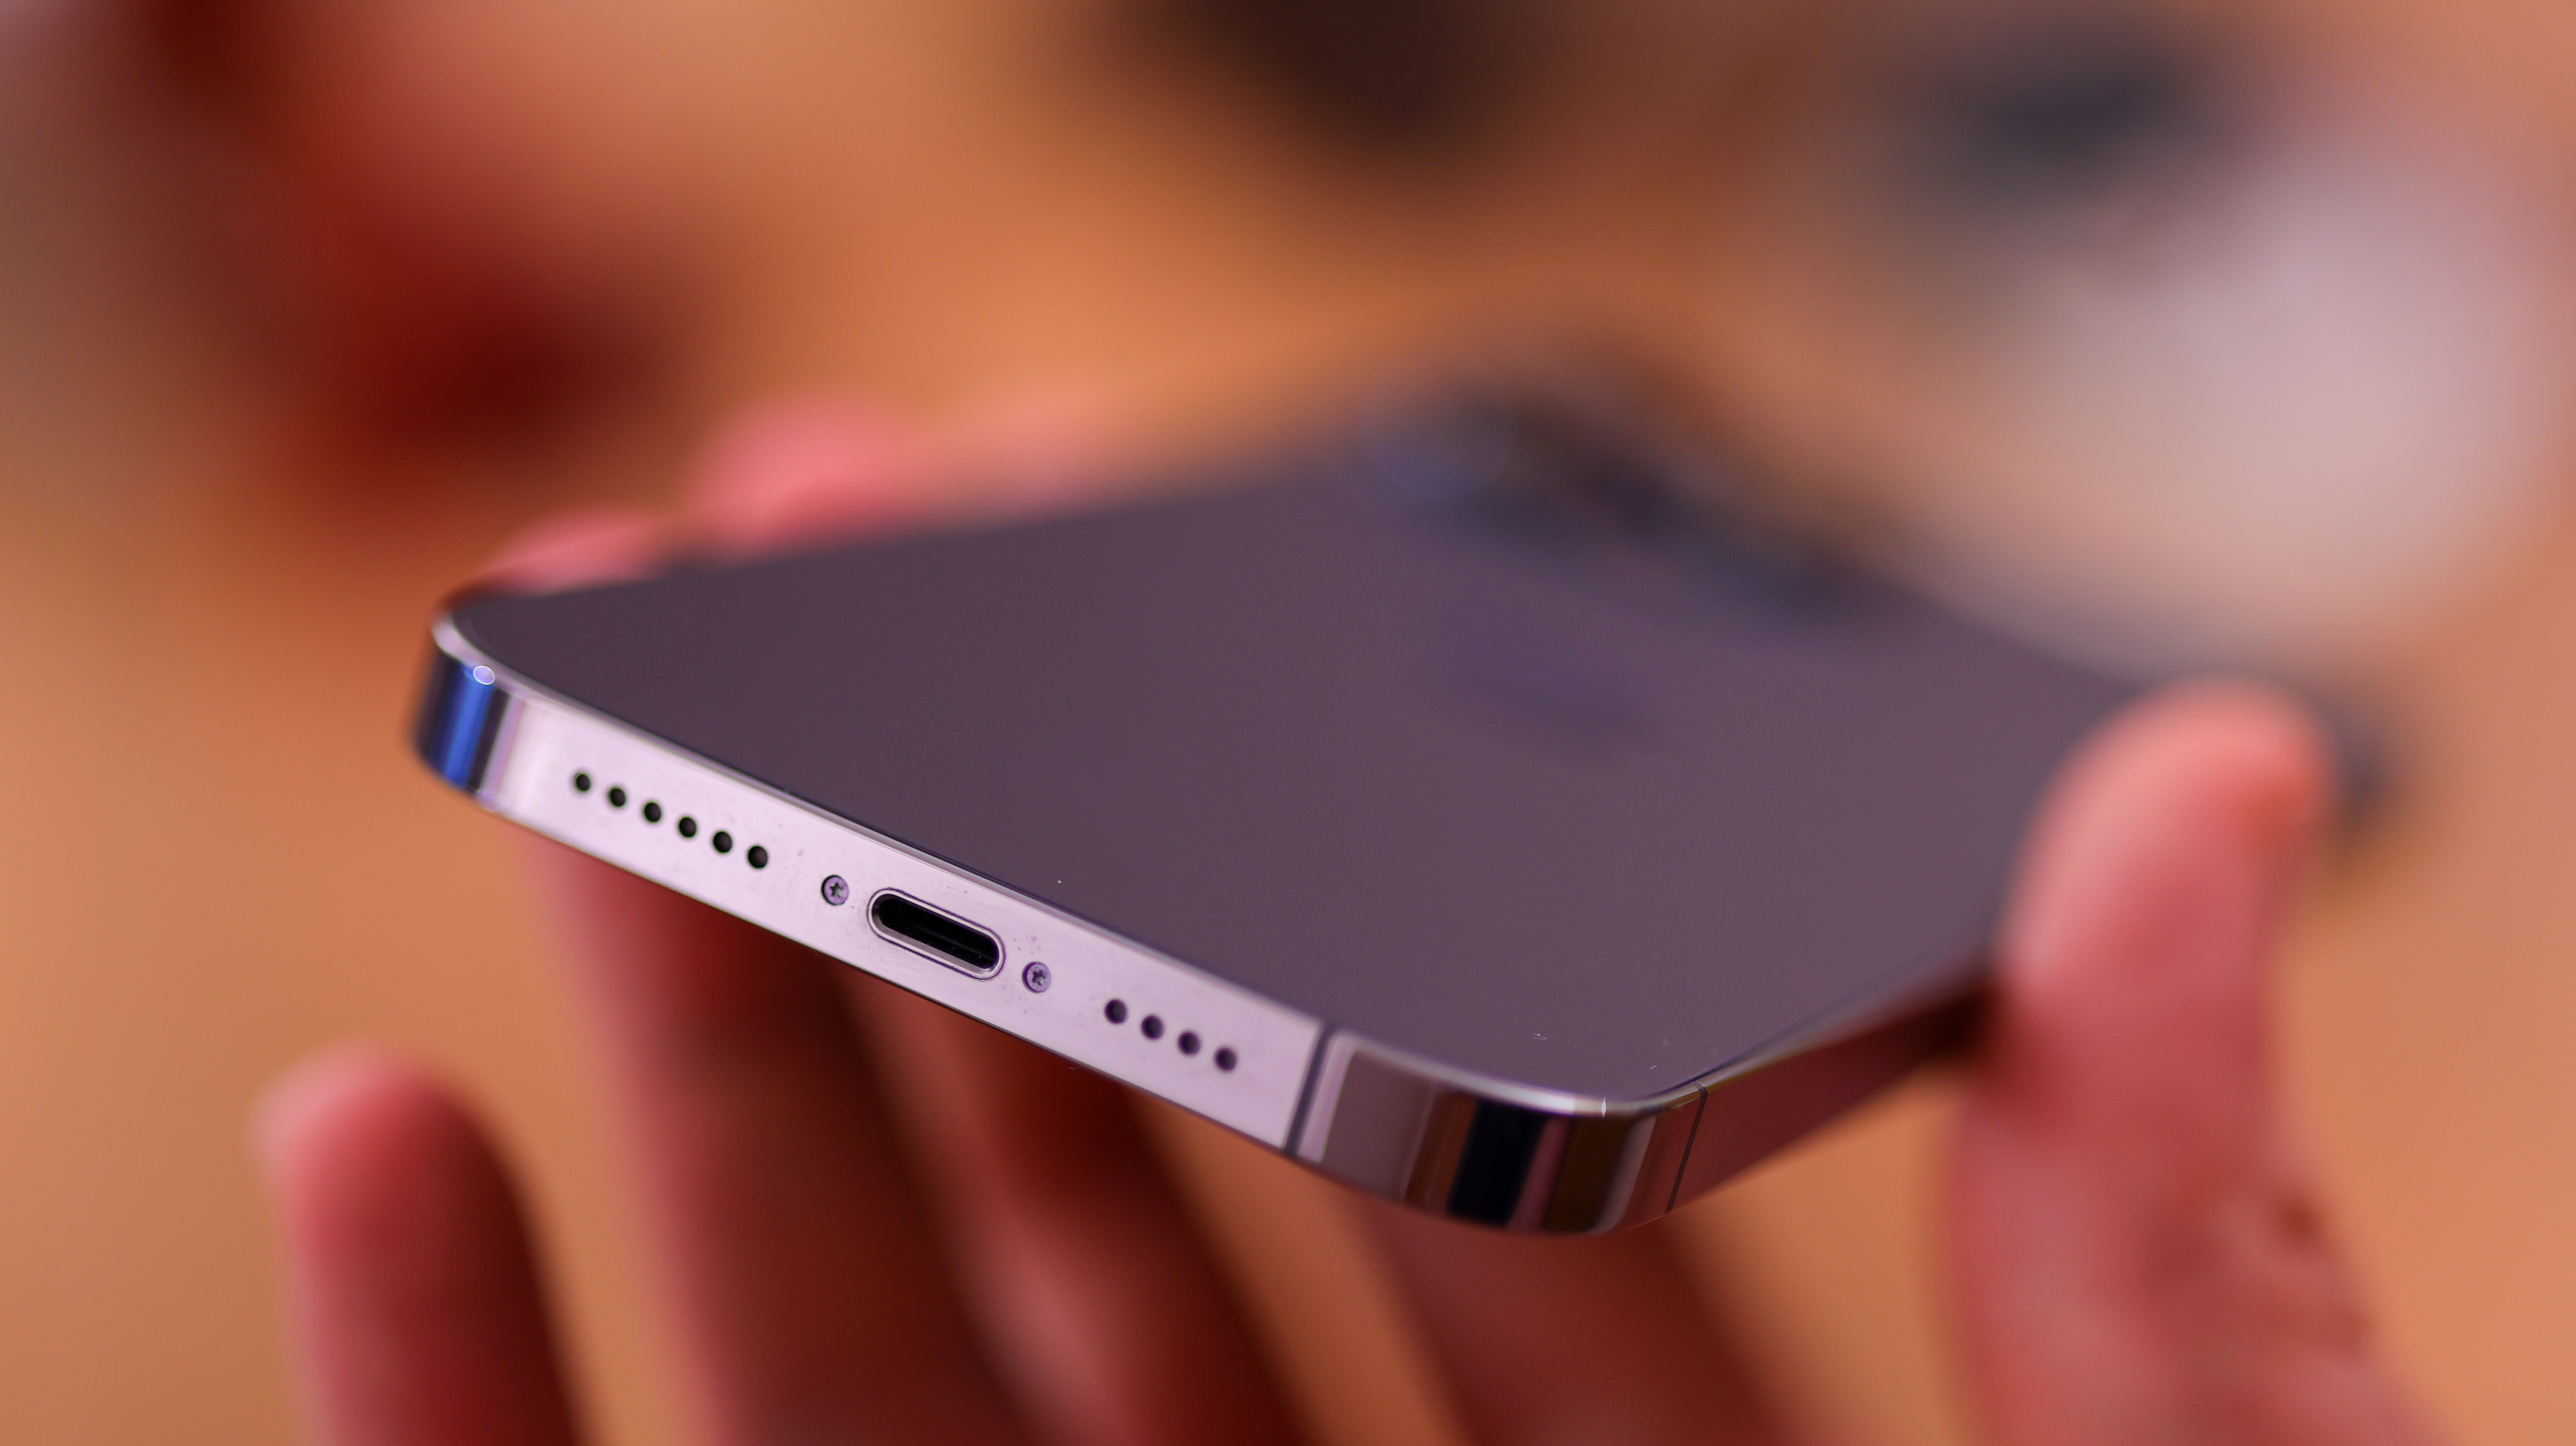 Turns out the iPhone 14 Pro Max has an awesome secret charging